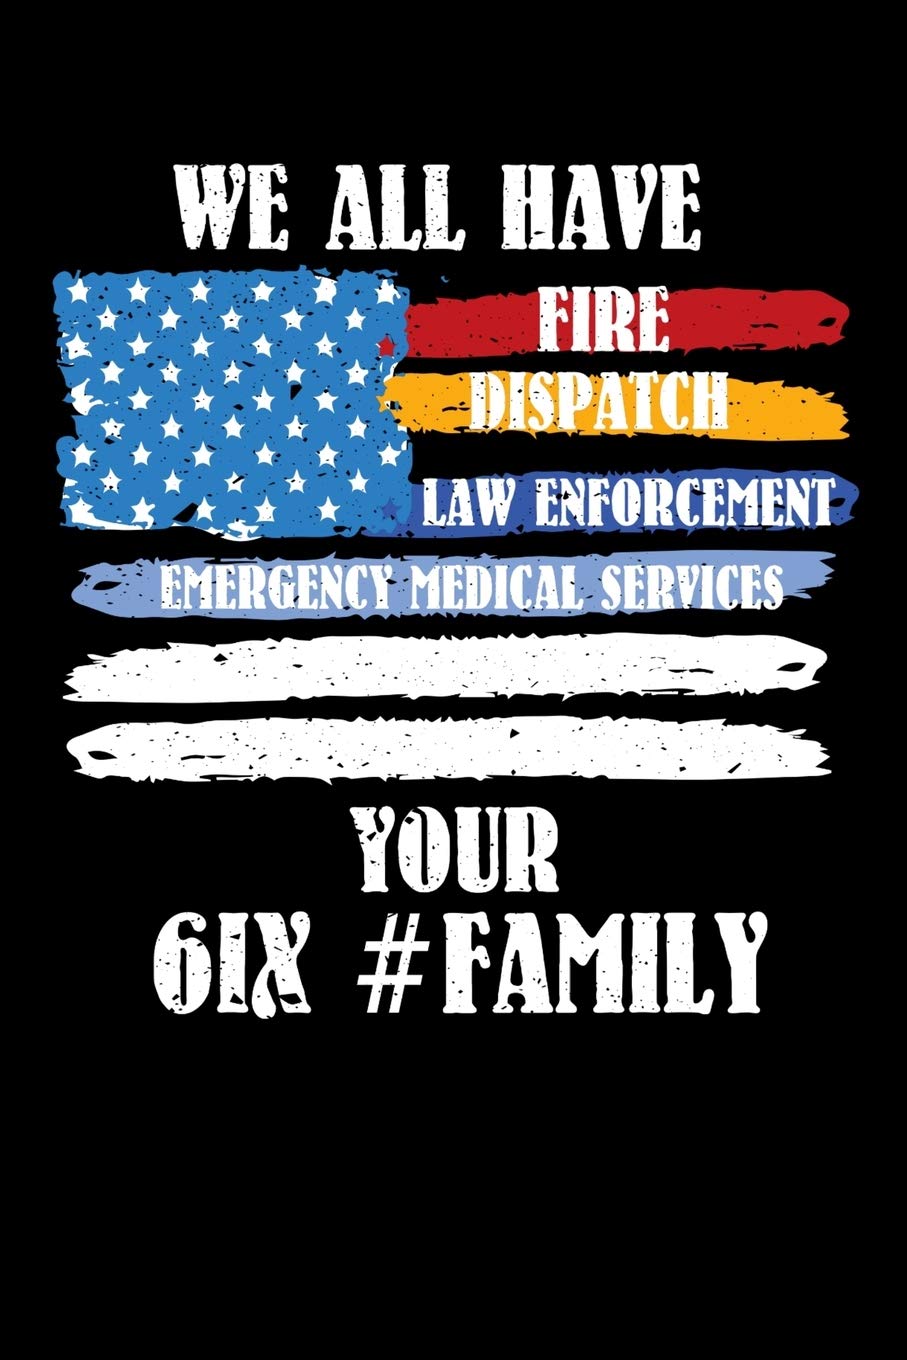 We All Have Fire Dispatch Law Enforcement Emergency Medical Services Your 61X #Family: First Responder, Dispatcher, Law Enforcement, Emergency medical services cool journal EMT EMS notebook for work: King, Cliff R: 9781089317081